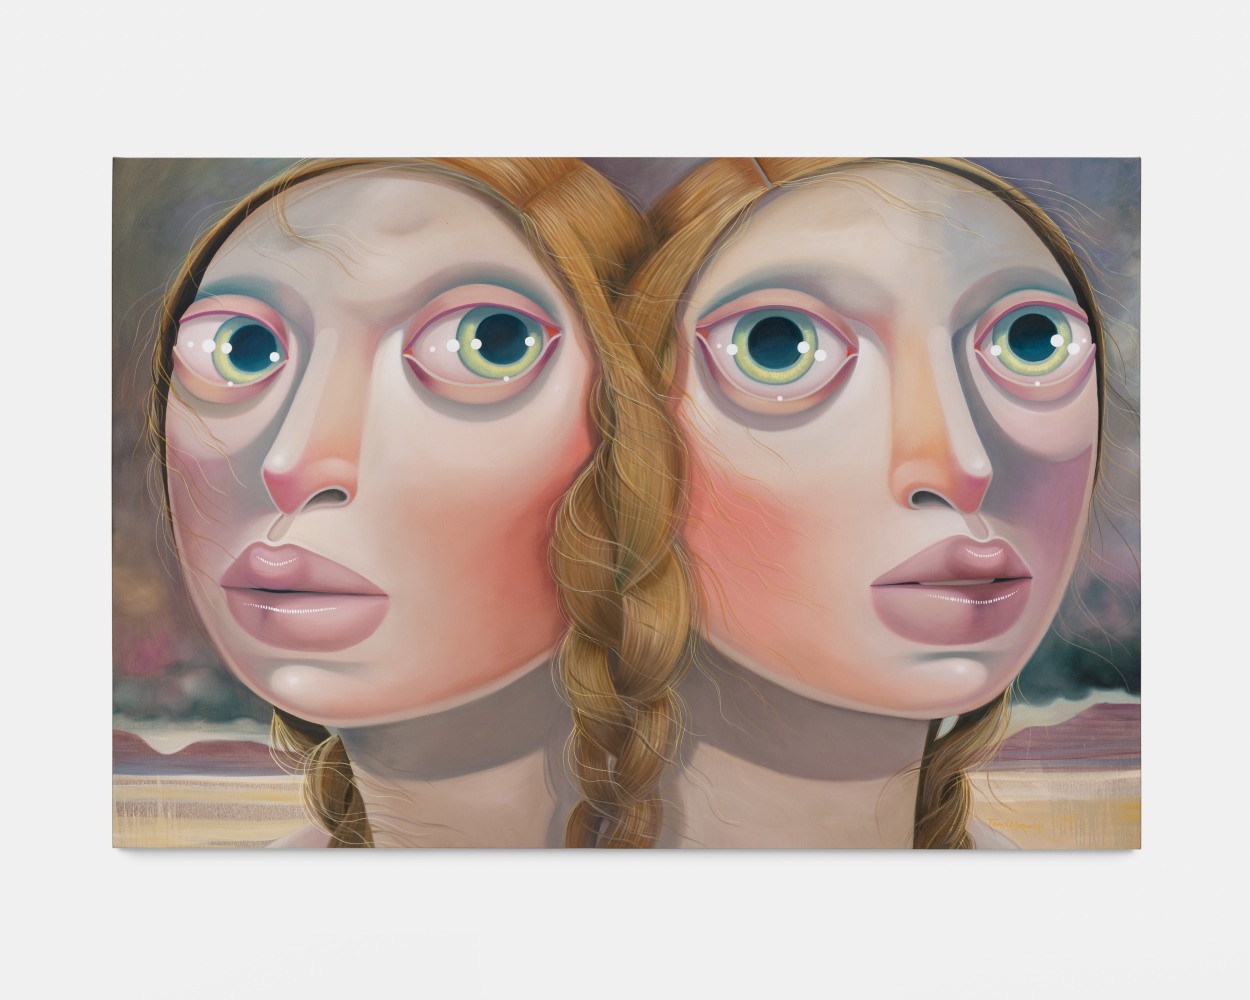 Tania Marmolejo

The Reluctant Mirror, 2022

oil on canvas

60h x 90w in

152.40h x 228.60w cm